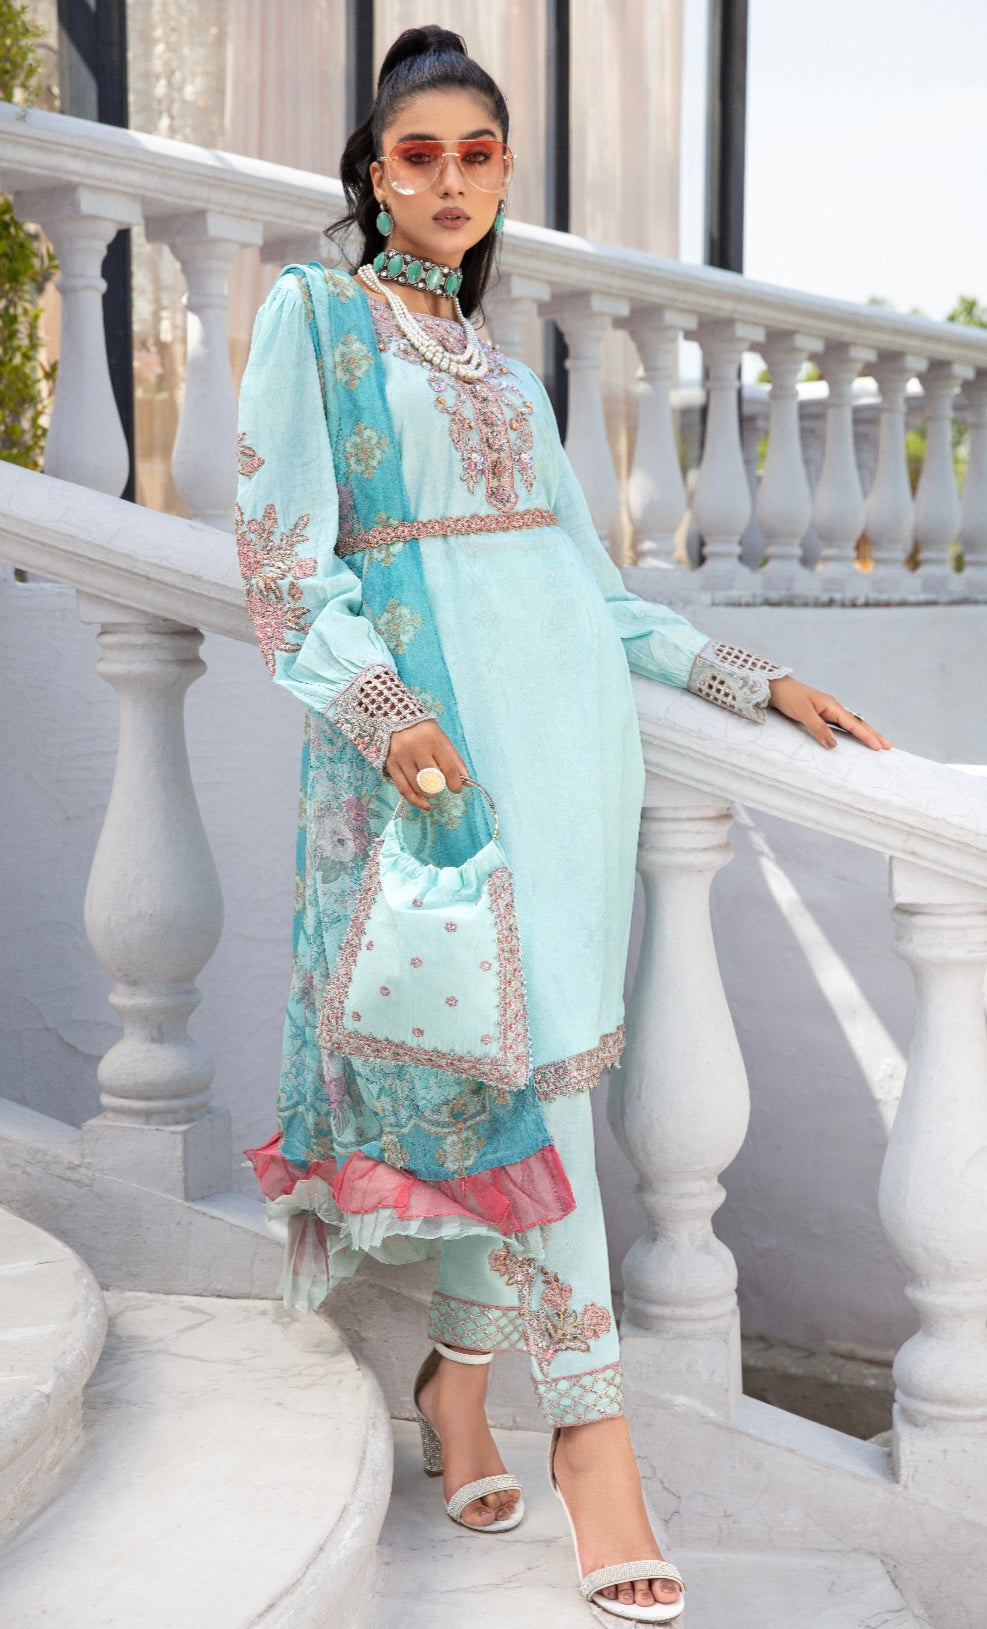 SIMRANS Ivana beaded embroidered lawn suit in ICE BLUE Mother Daughter/kids